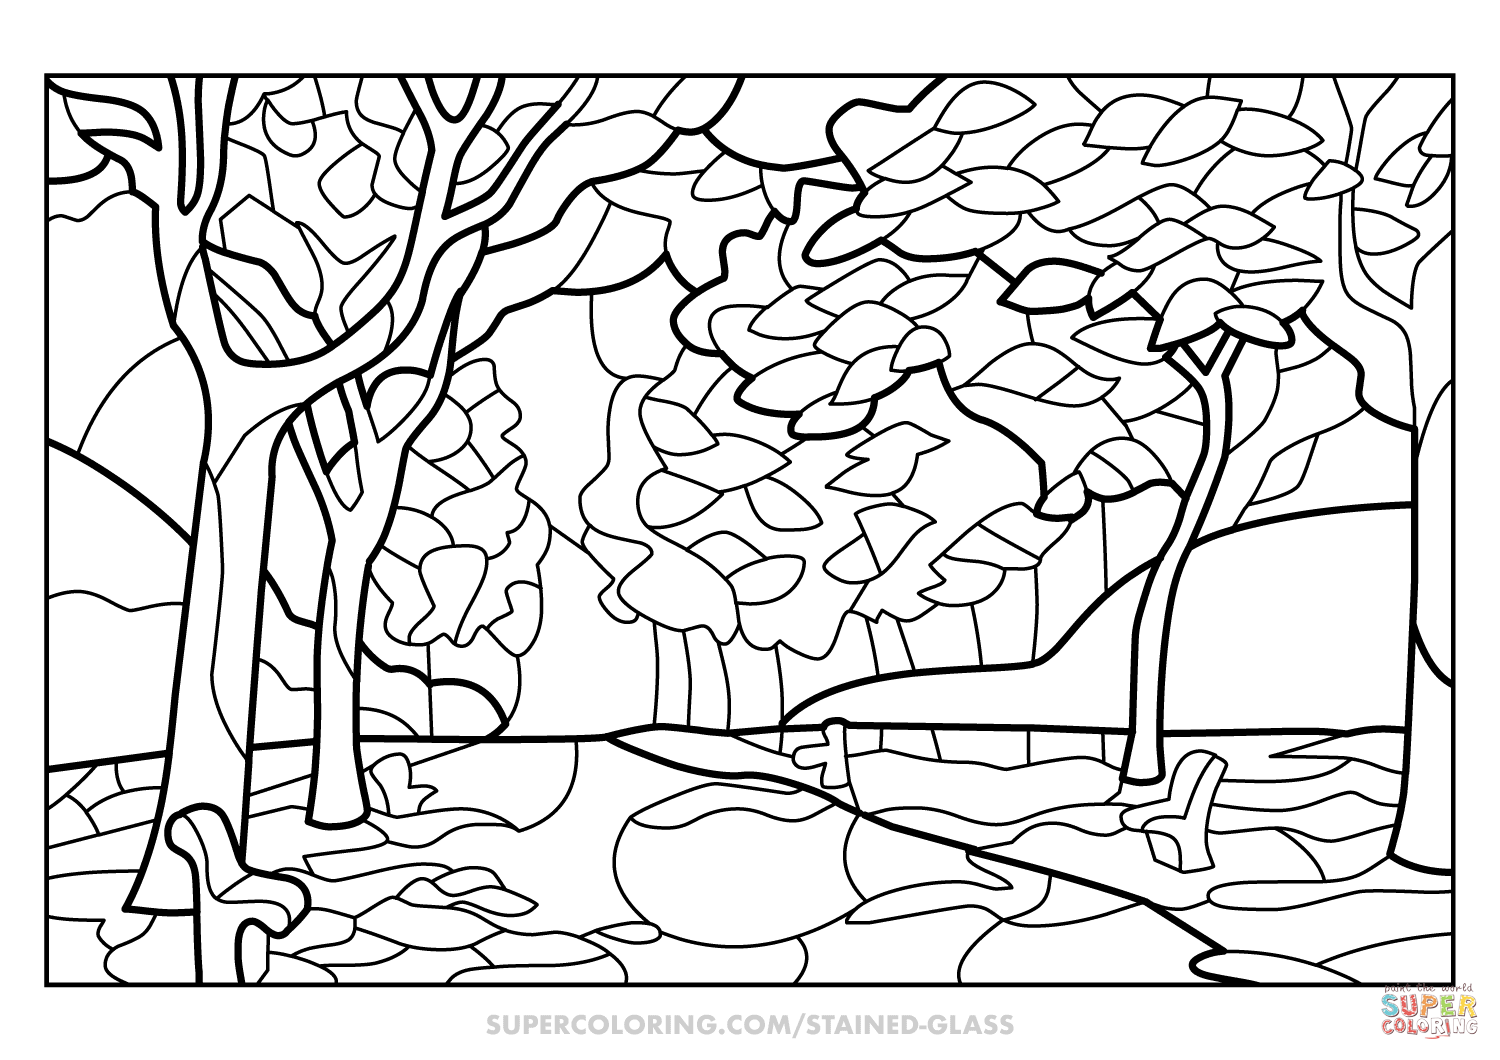 Fall trees stained glass coloring page free printable coloring pages